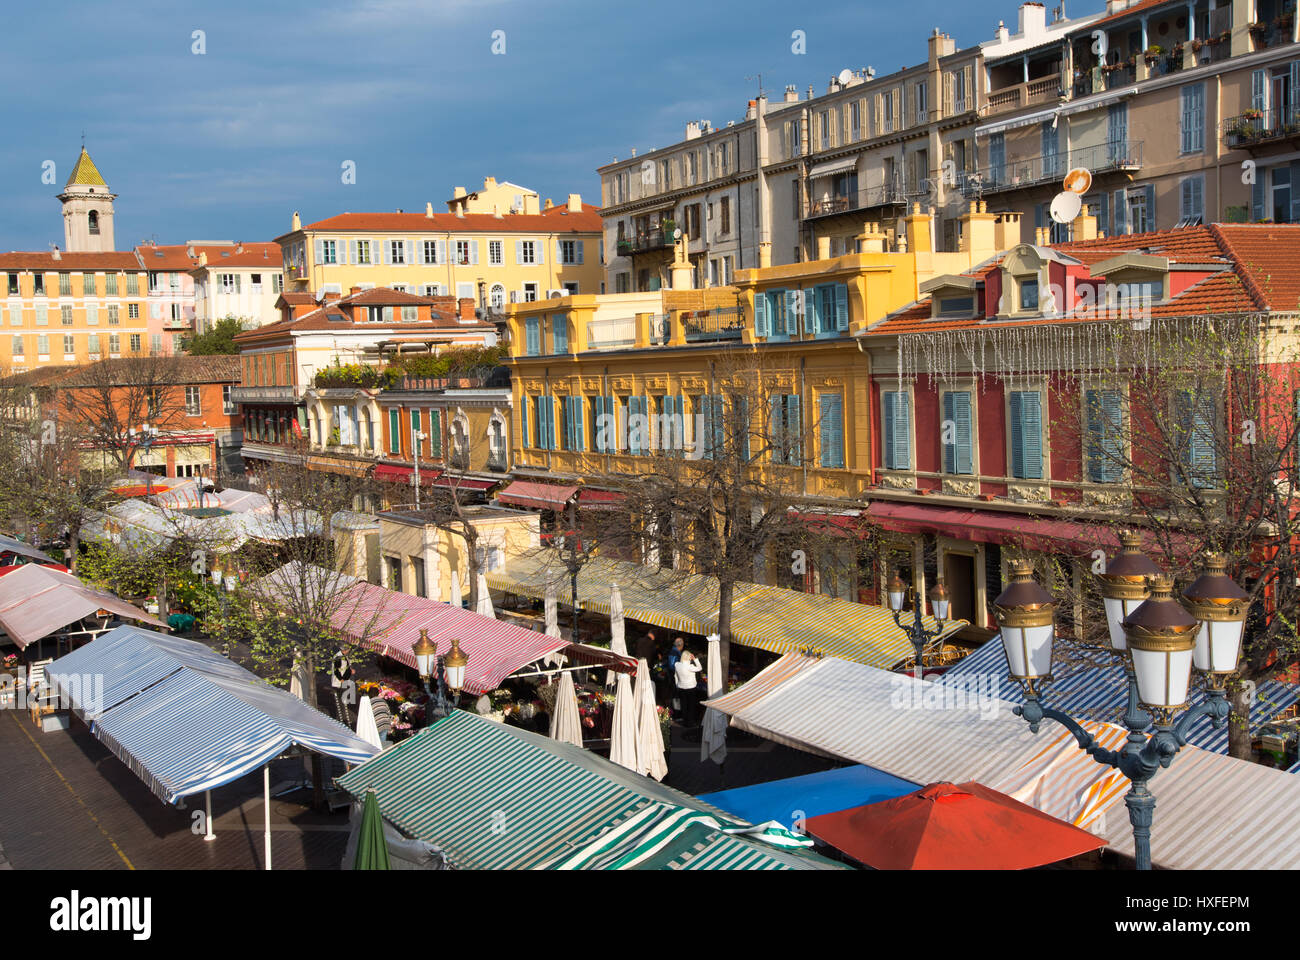 Market in old town of Nice, France Stock Photo